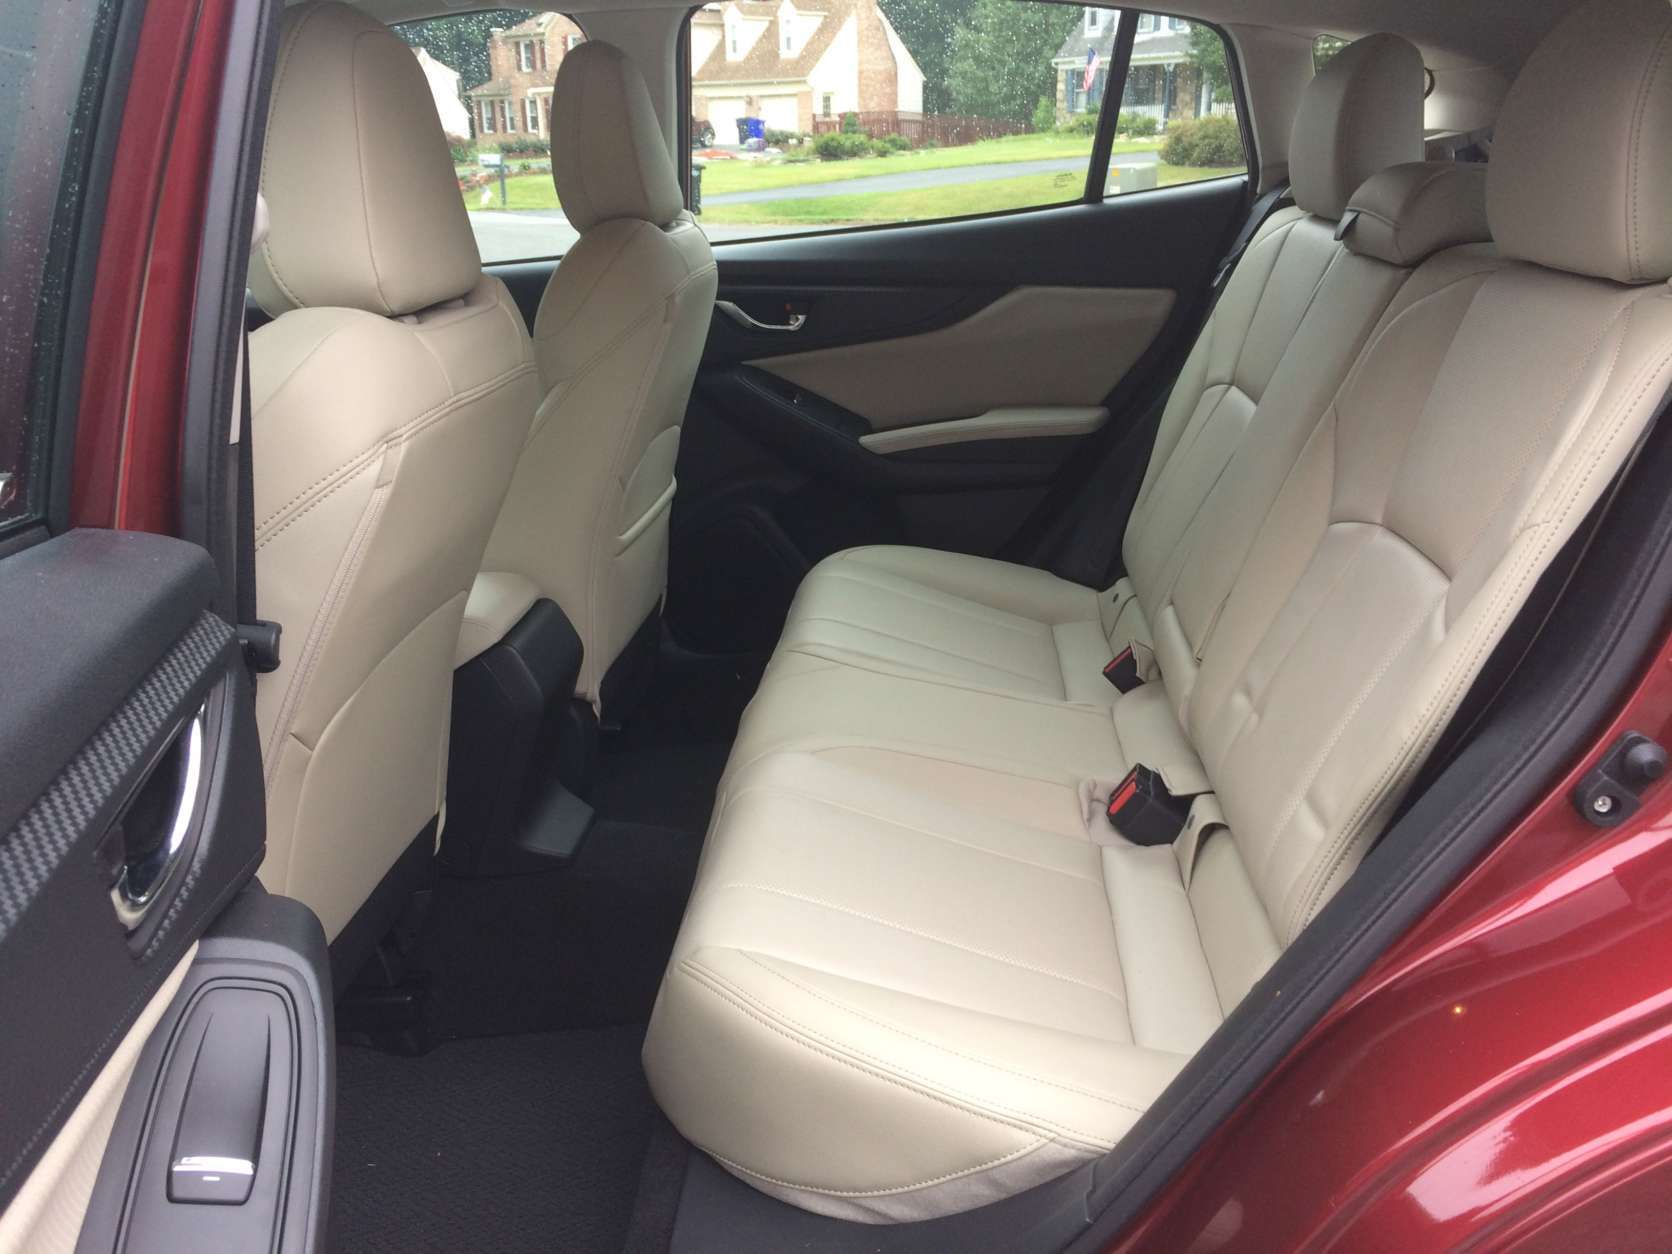 The seats, which always seemed very firm, are a bit easier on your body now, said Parris. There’s plenty of head and leg room all around, including the back seats. Parris easily fit two child seats and a booster, which is very spacious for a compact. (WTOP/Mike Parris)